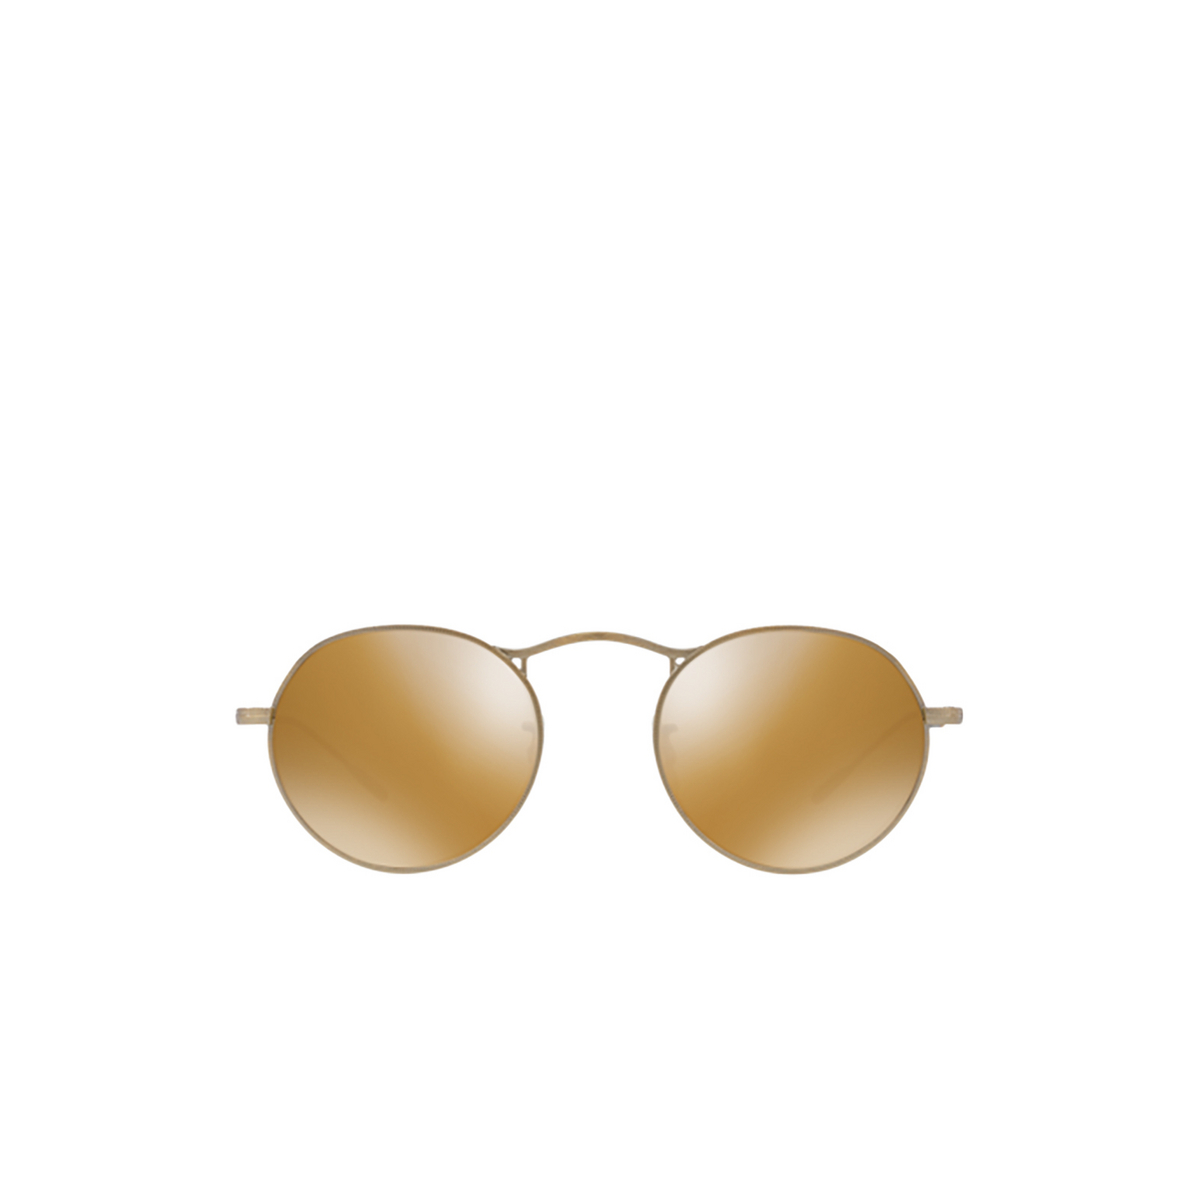 Oliver Peoples M-4 30TH Sunglasses 5039W4 Antique Gold - front view